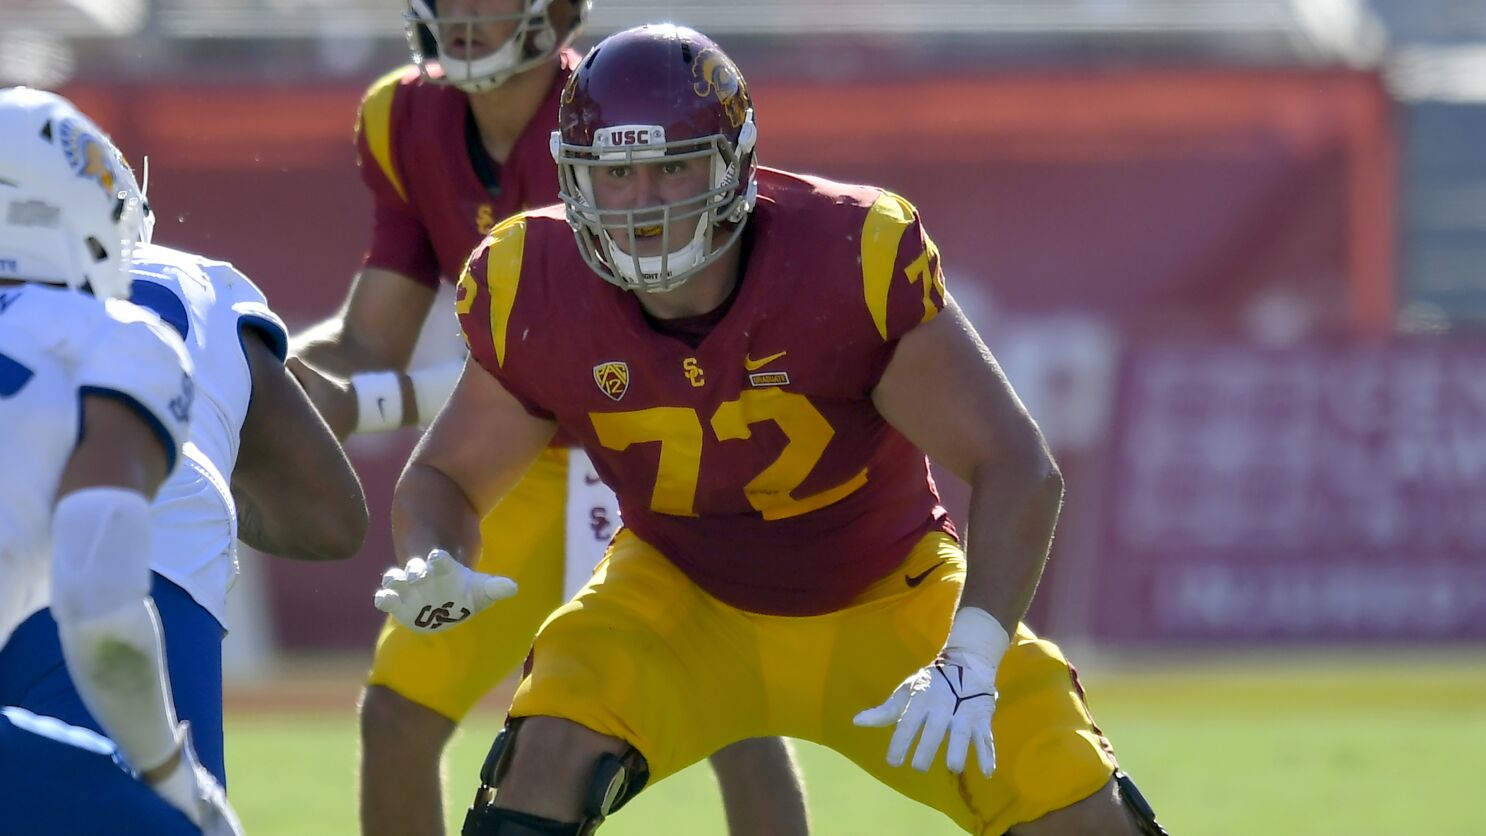 USC offensive lineman Andrew Vorhees returning for Trojans - Los Angeles  Times